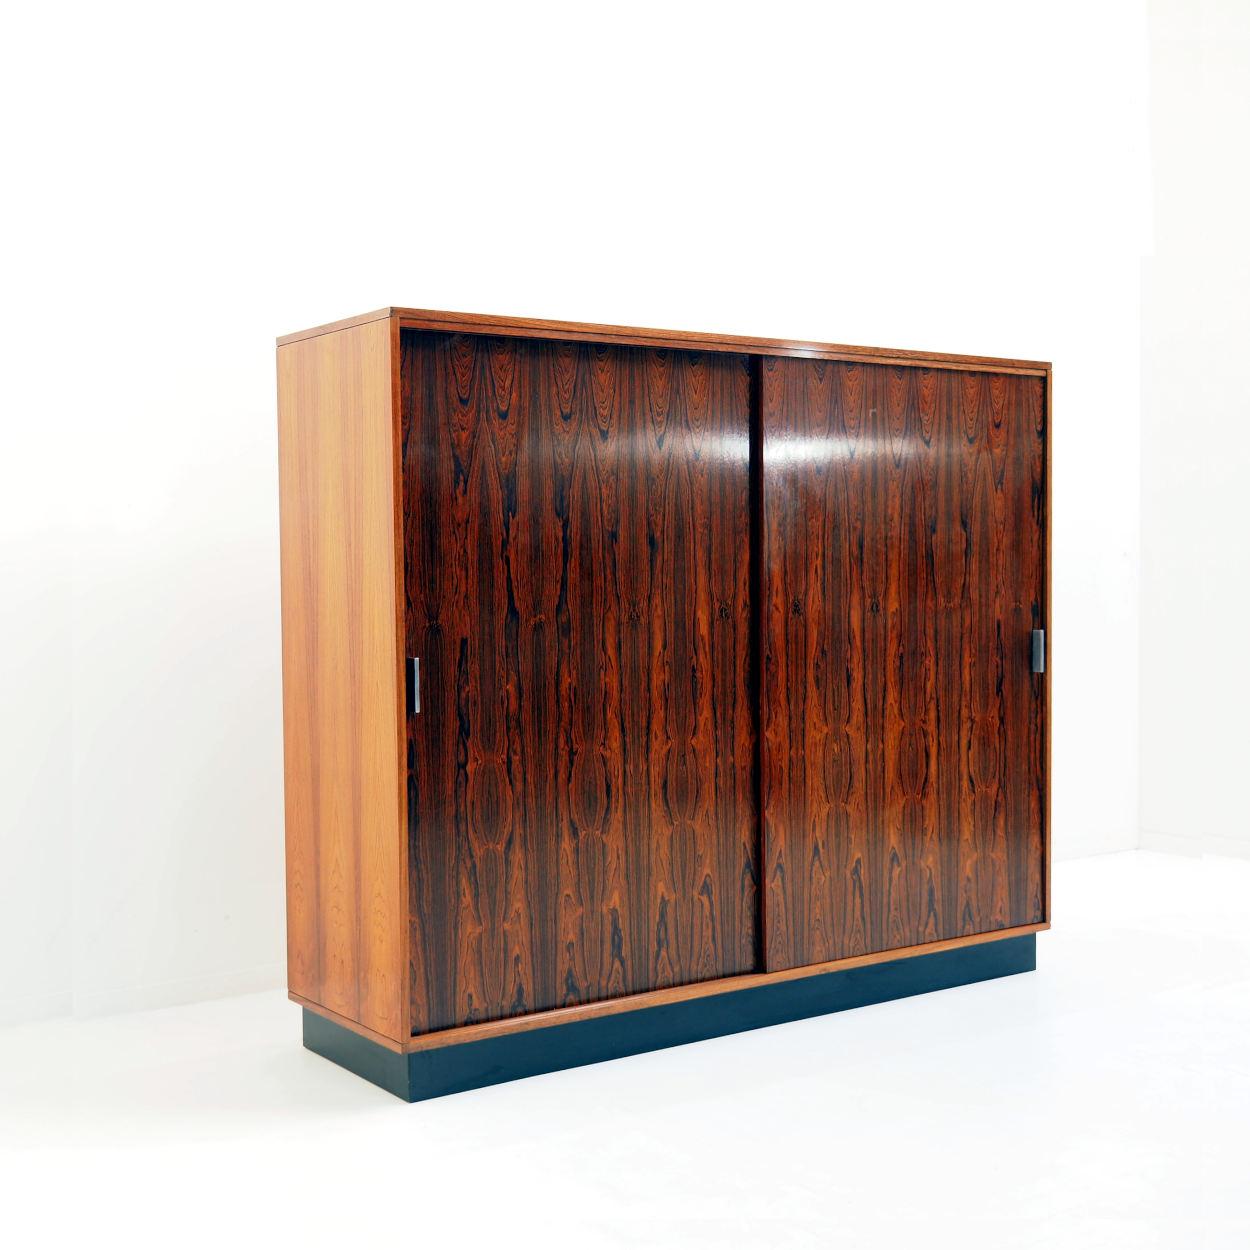 Beautiful wardrobe designed by Belgian designer Alfred Hendrickx for the company Belform. The design is from the 1960s.

The doors of the cabinet are made of beautiful exotic dark wood.

The wardrobe consists of two sliding doors with plenty of